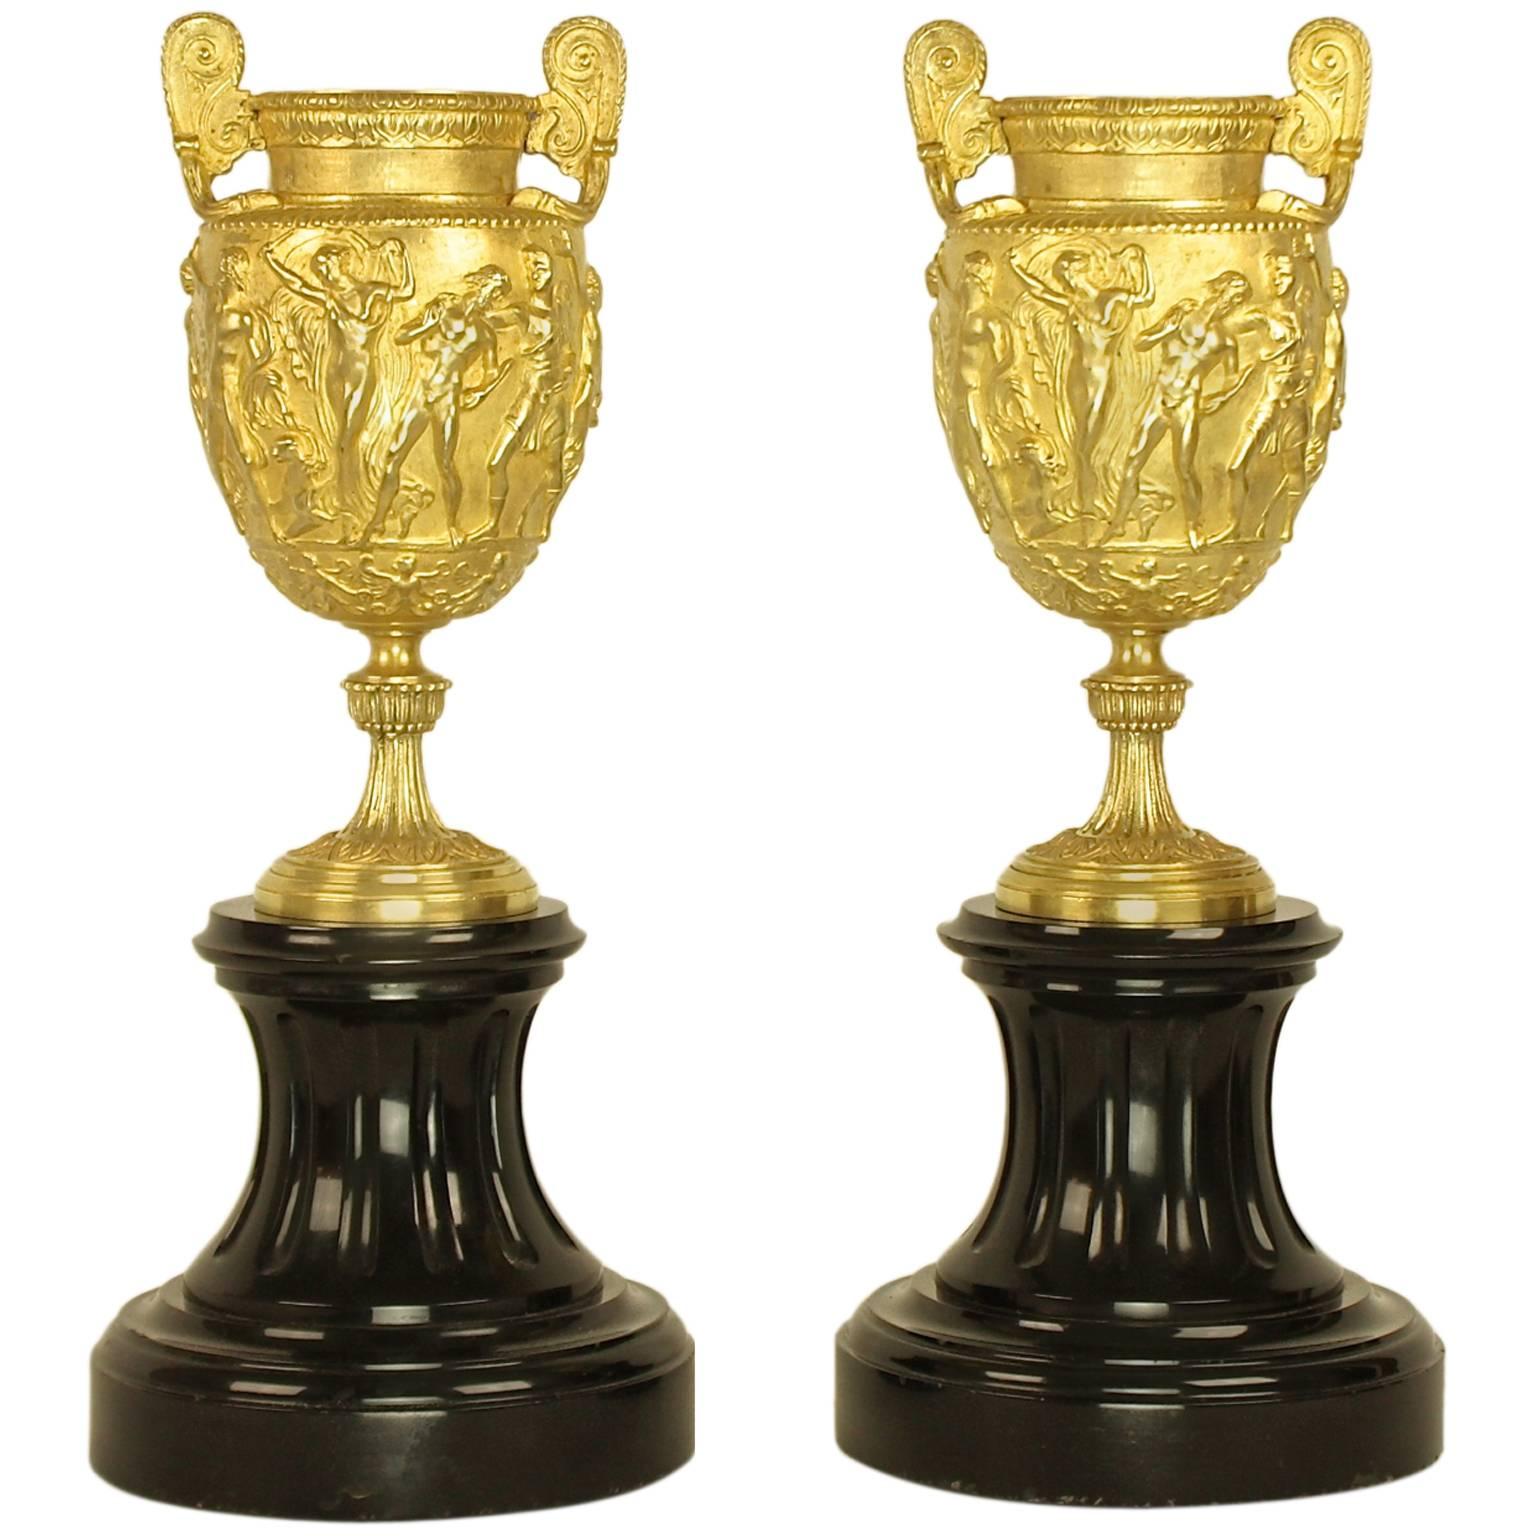 Pair of French Charles X Neoclassical Bacchanal Gilt Bronze Black Marble Urns